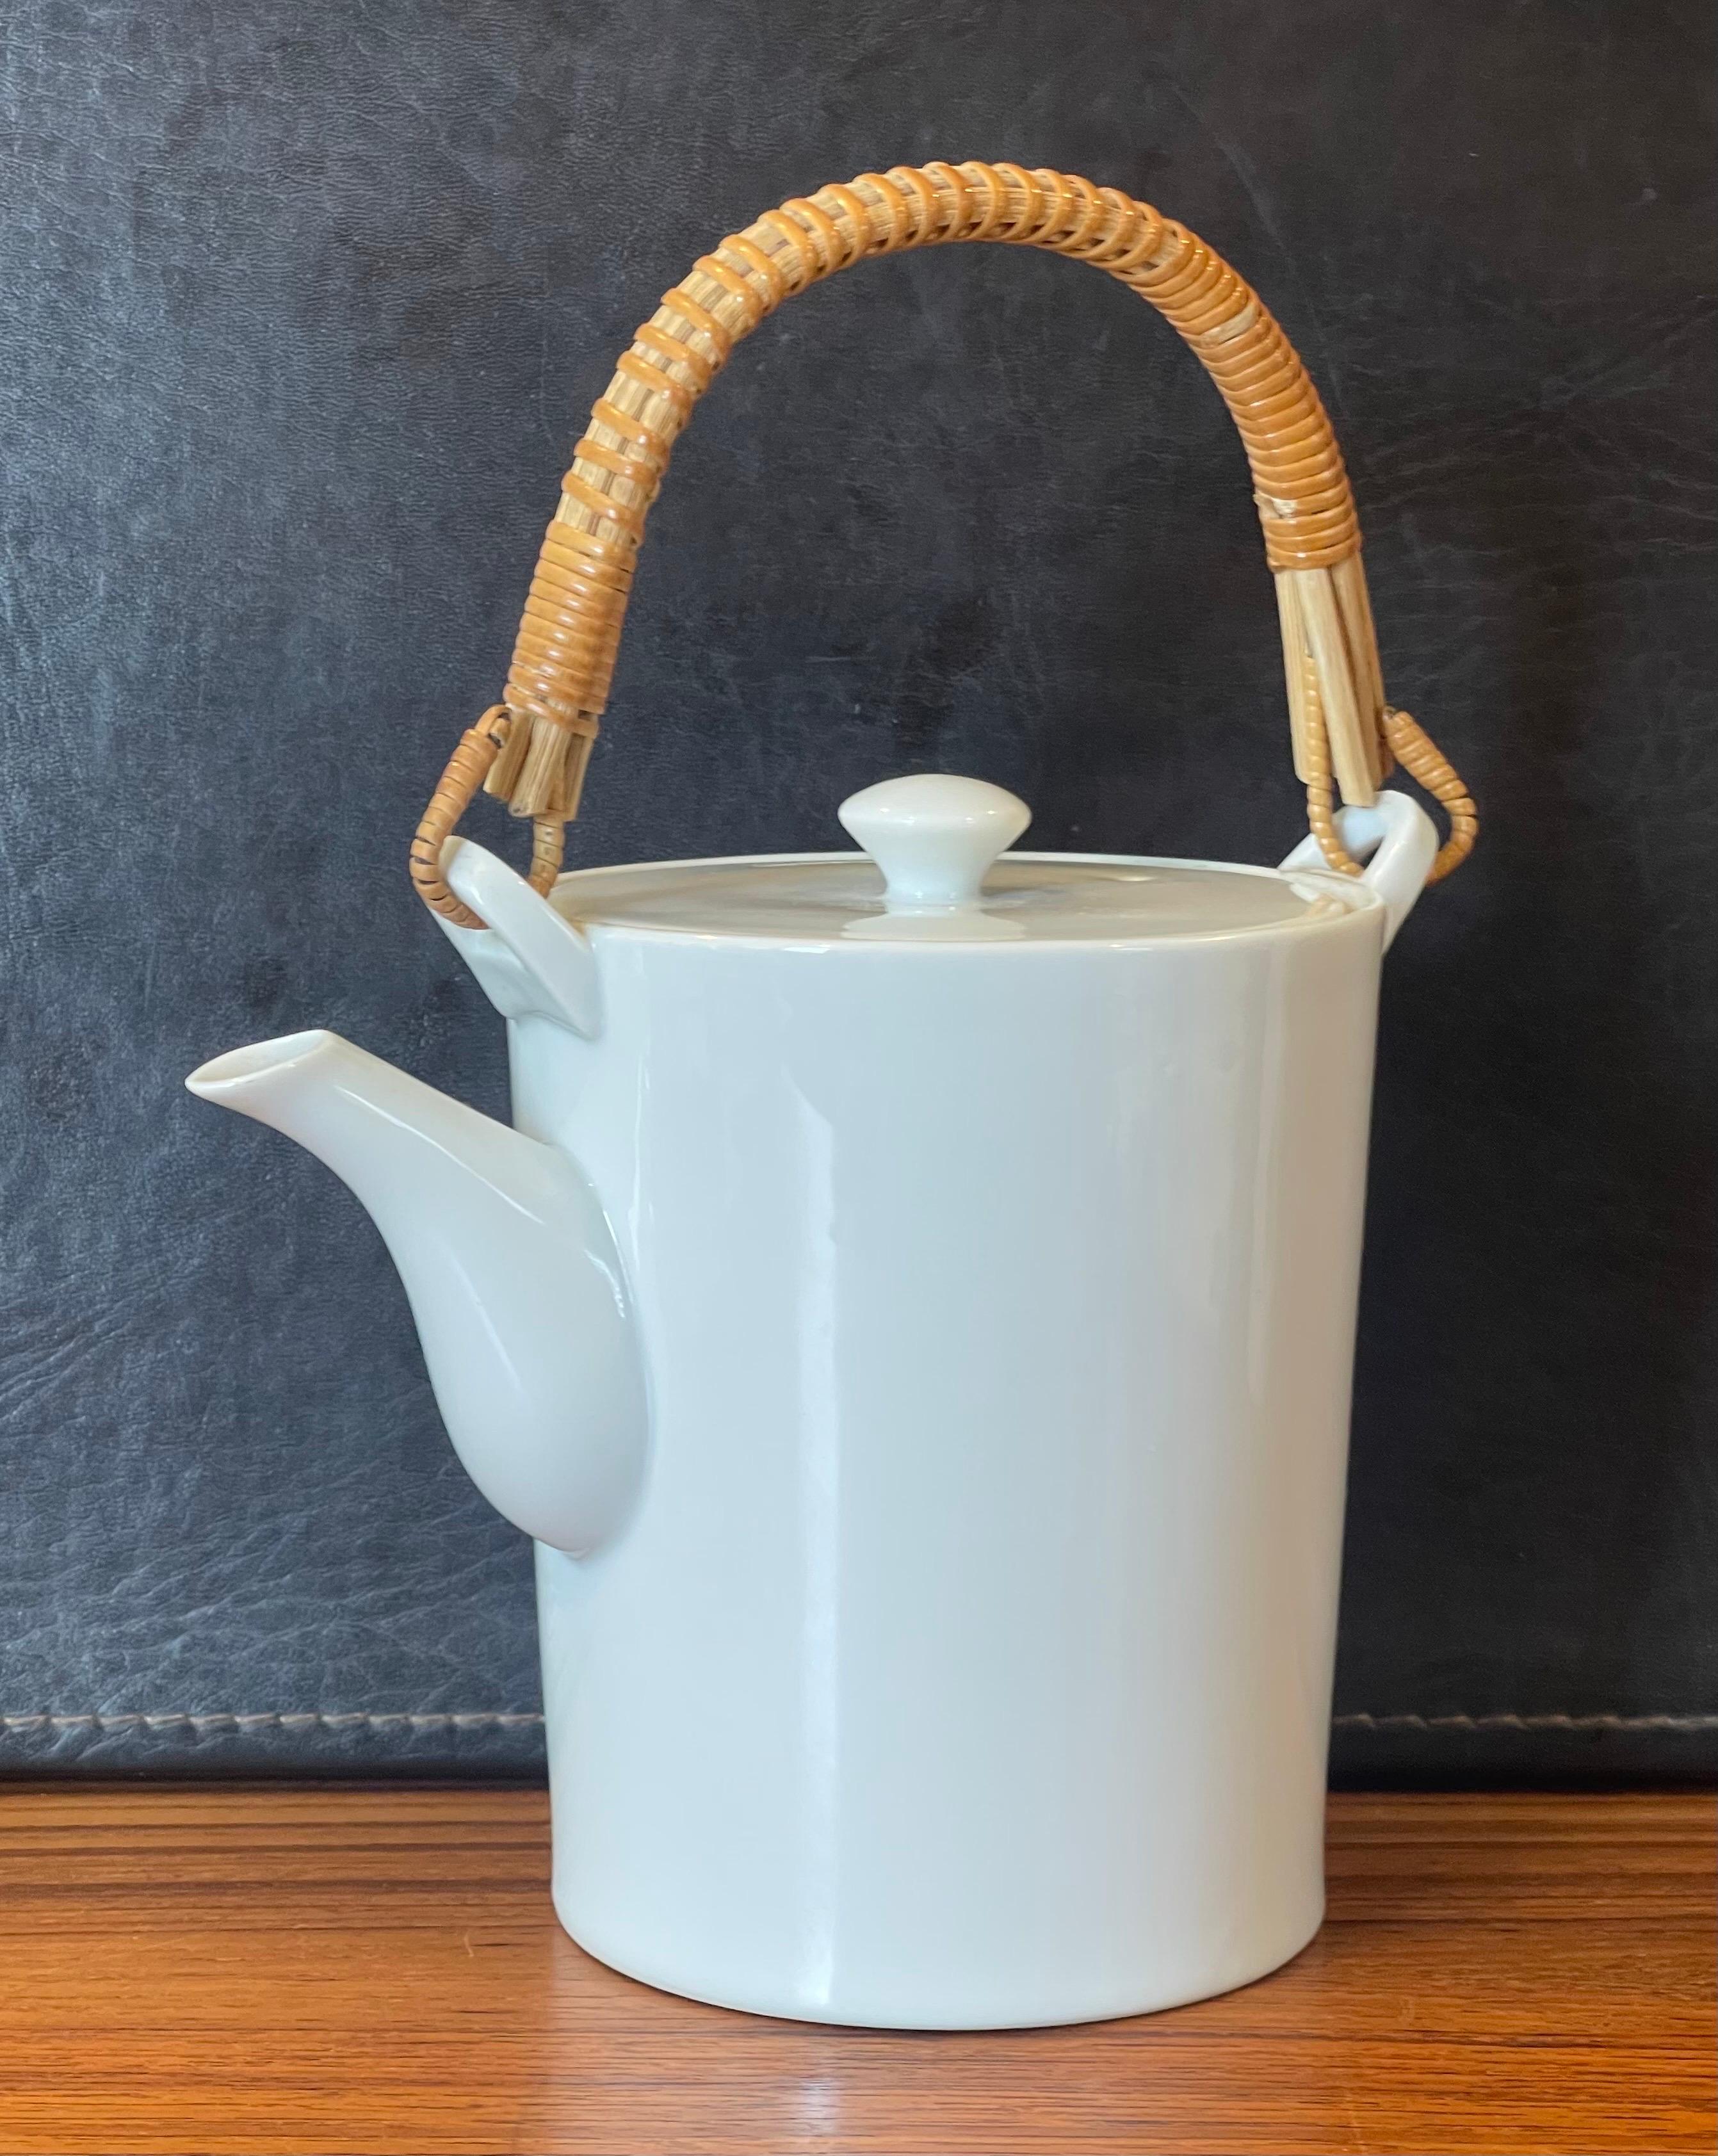 Rare white porcelain and cane handle teapot by Kenji Fujita for Freeman Lederman, circa 1950s. The pot is in very good vintage condition with no chips or cracks (some tea staining to the inside) and measures 5.25